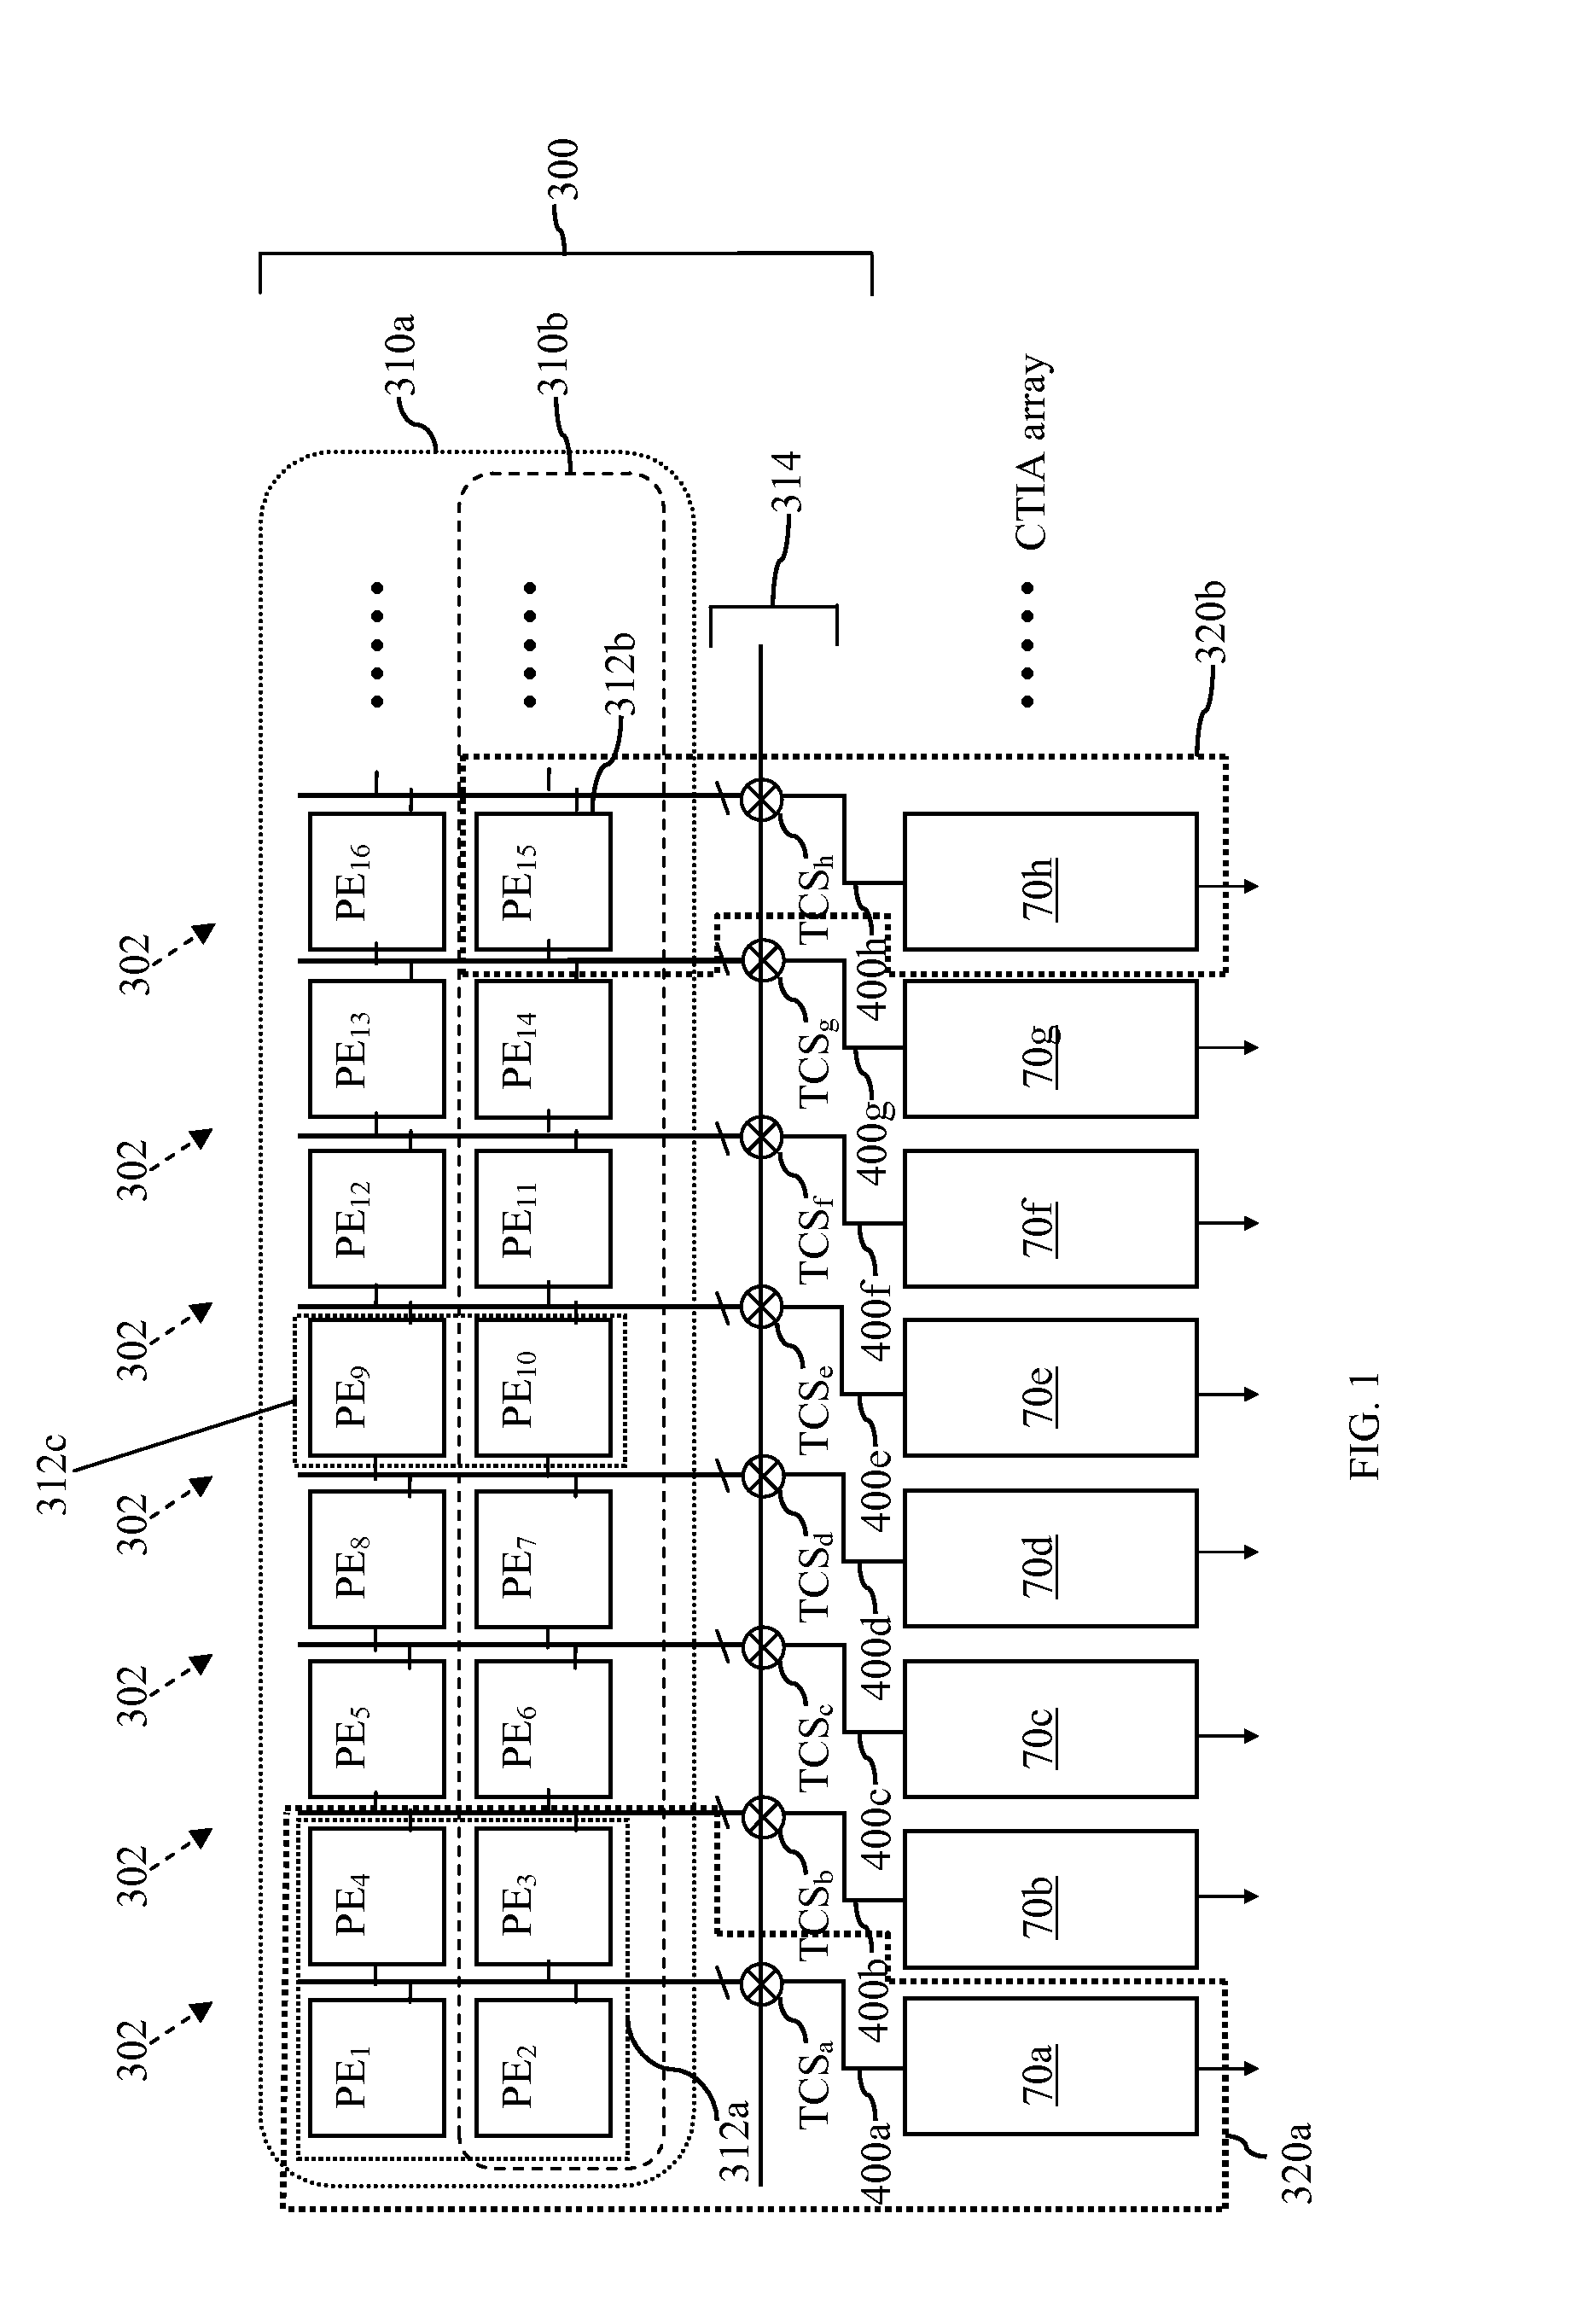 Multi-resolution Image Sensor Array with High Image Quality Pixel Readout Circuitry